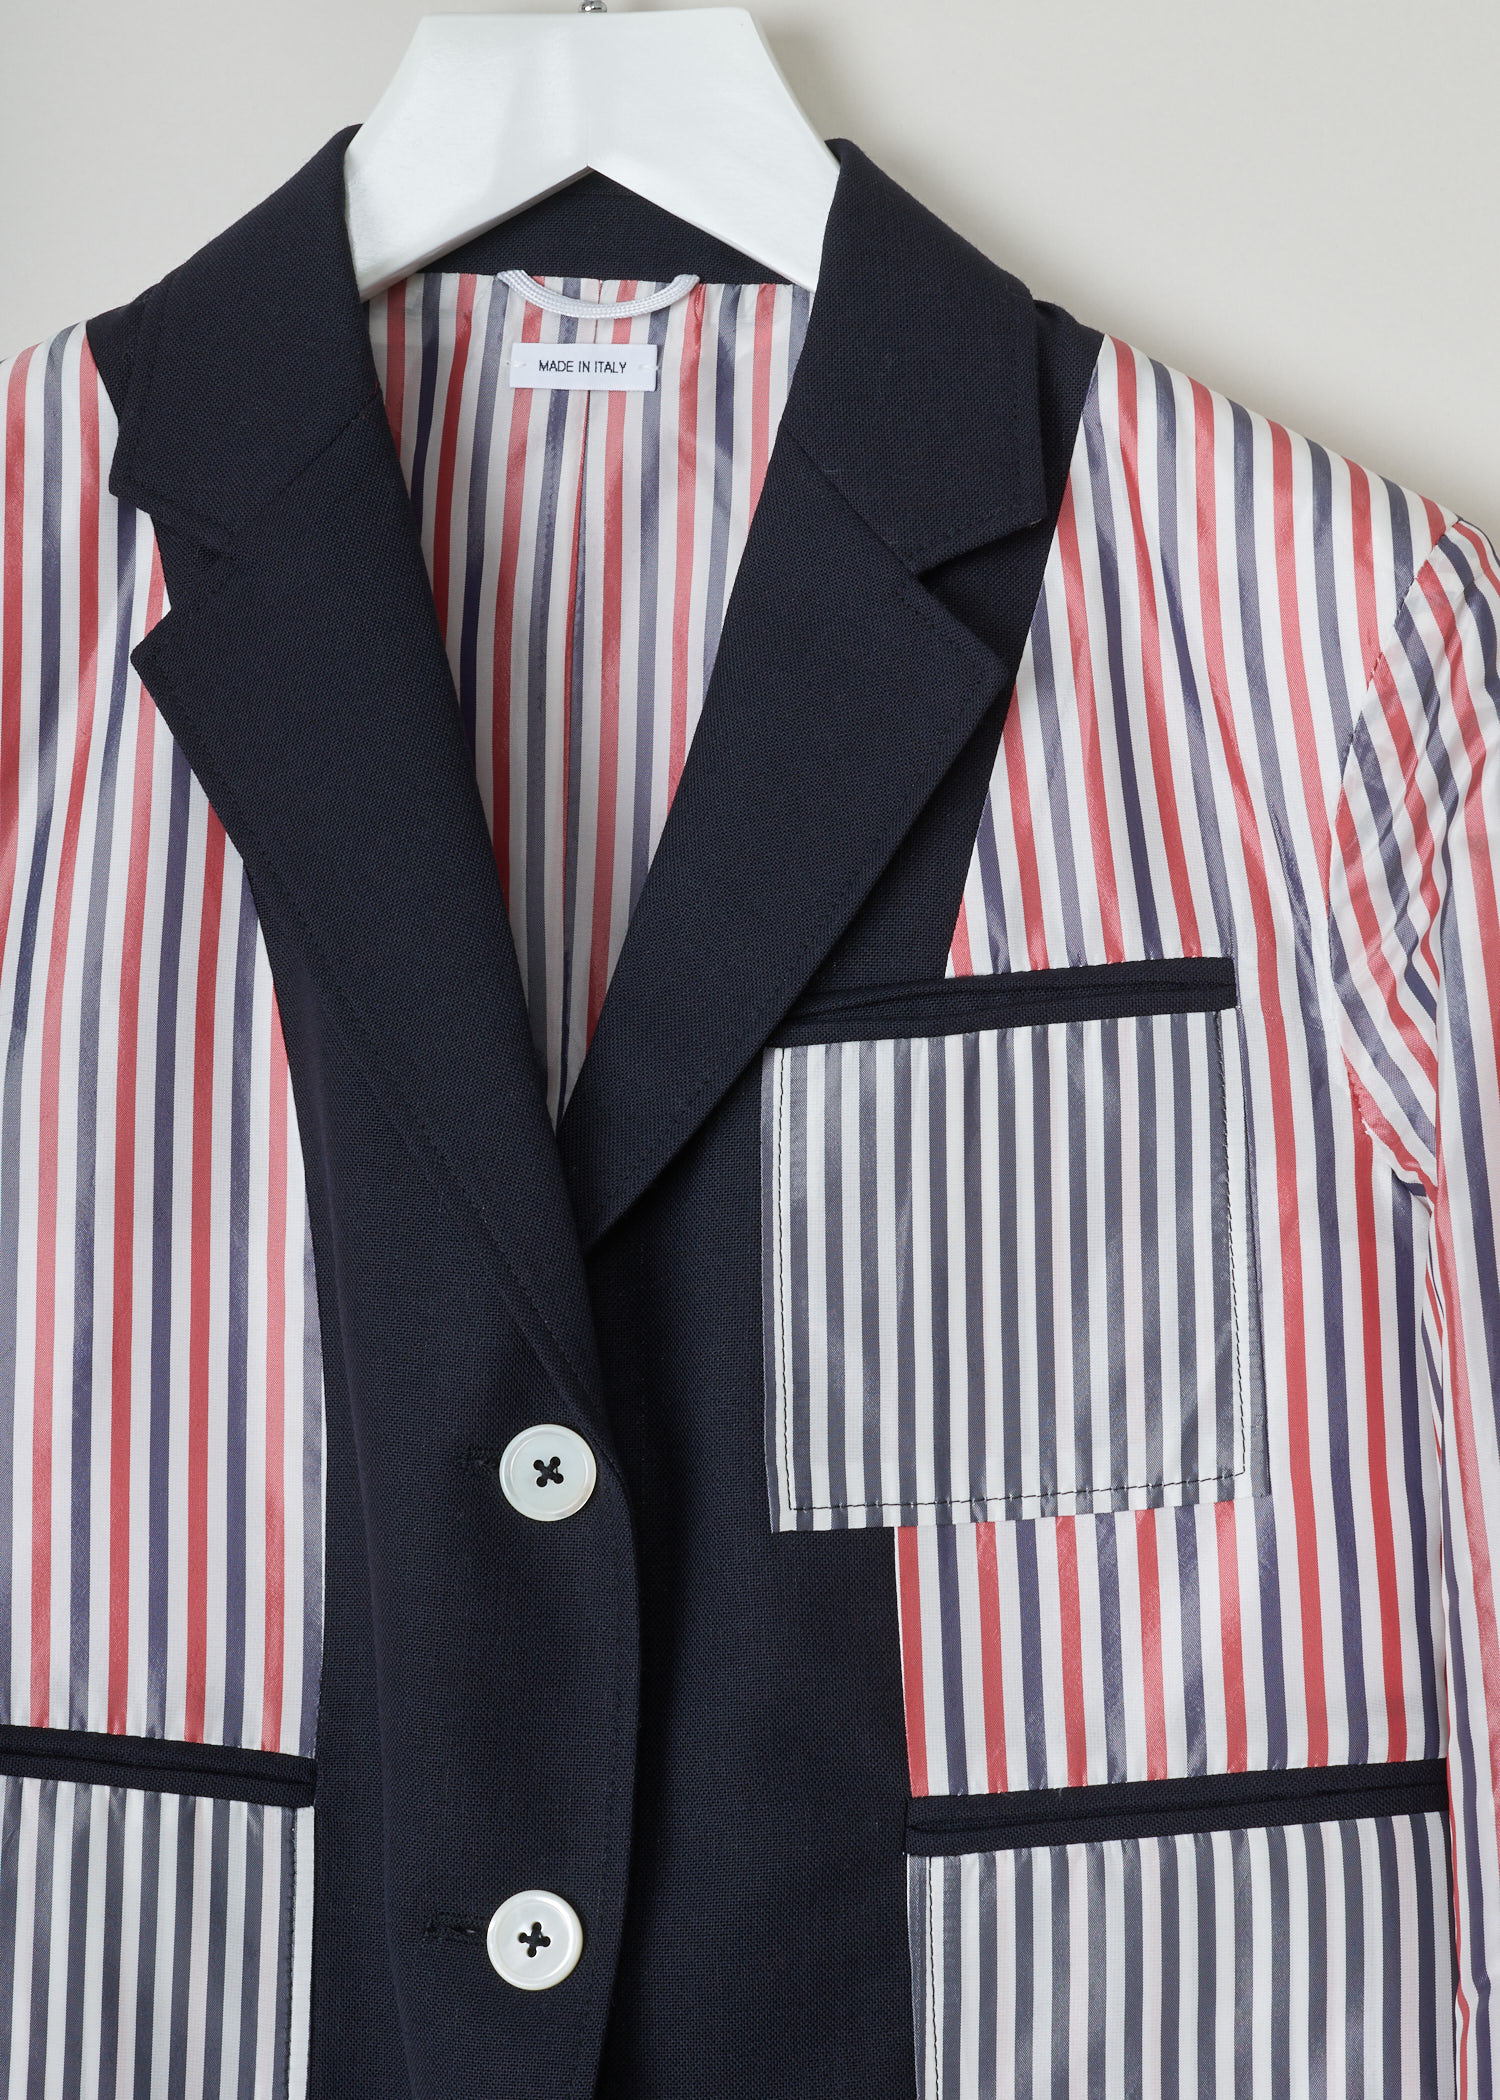 Thom Browne, Red and blue striped jacket, FBC510A_00473_415_navy, red white blue, detail2. jetted pockets. This inside out jacket features a regular collar and a notched lapel. Going further down the long sleeves, you will find four buttoned cuffs. It has a single chest pocket and below that two jetted pockets. The jacket comes with the signature grosgrain  tab on the back.